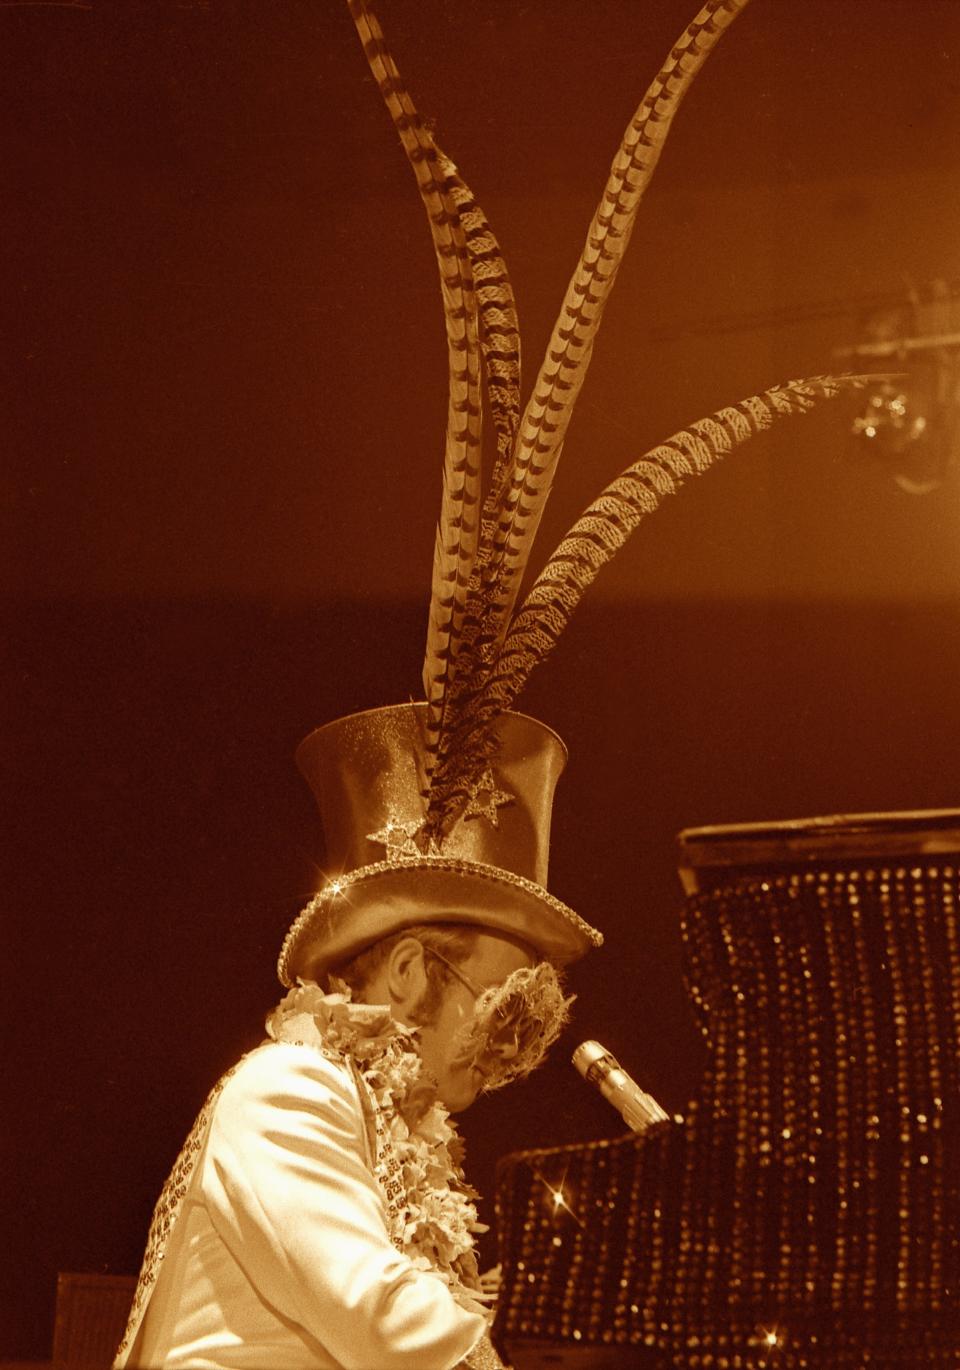 John performs onstage in a feathered hat.&nbsp;